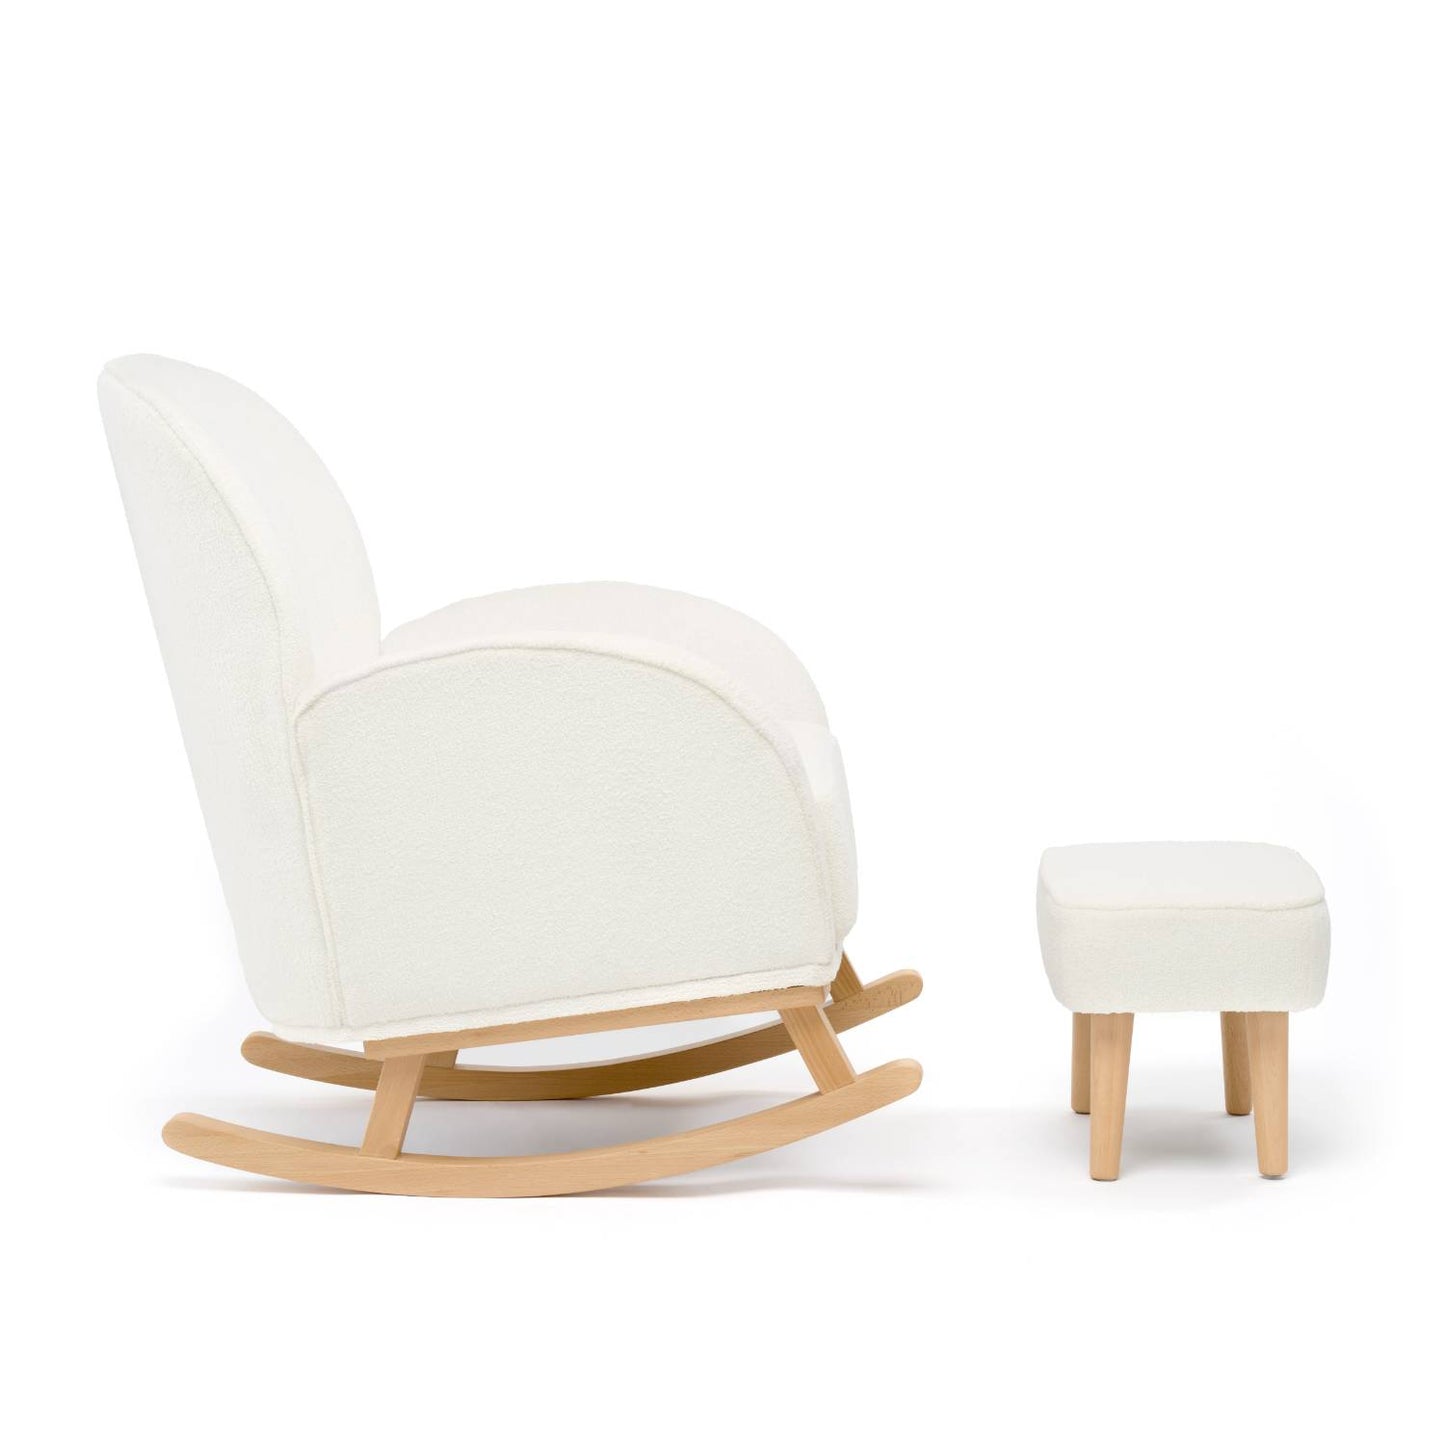 A side view shot of the Babymore Freya Nursing Rocking Chair with Stool Set in Off White Boucle colour showing its natural wood curved rocker legs.